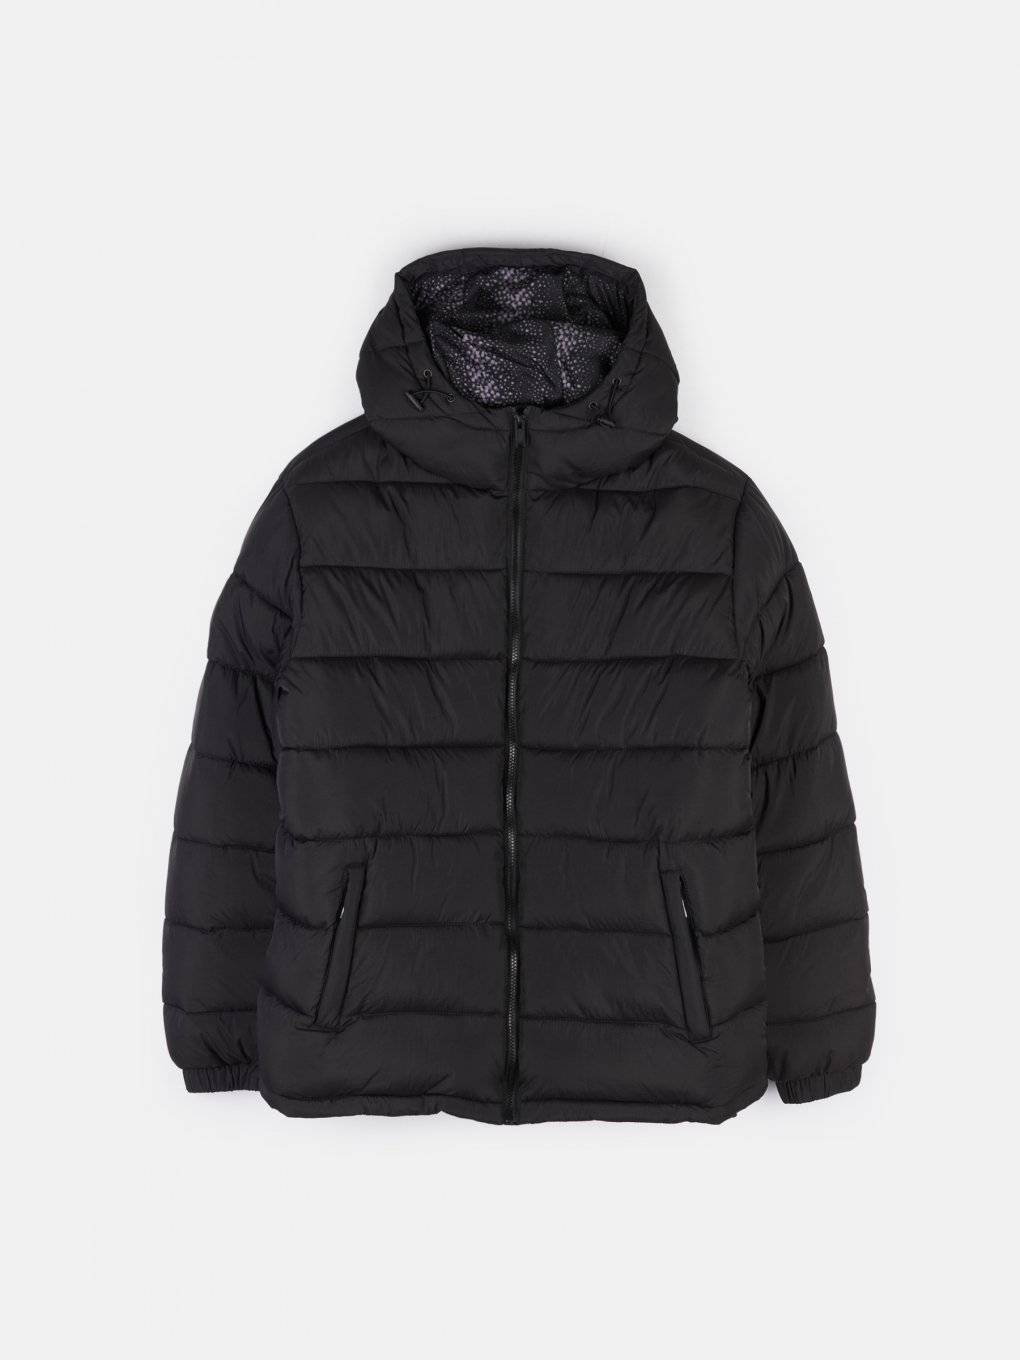 Padded winter jacket with fixed hood